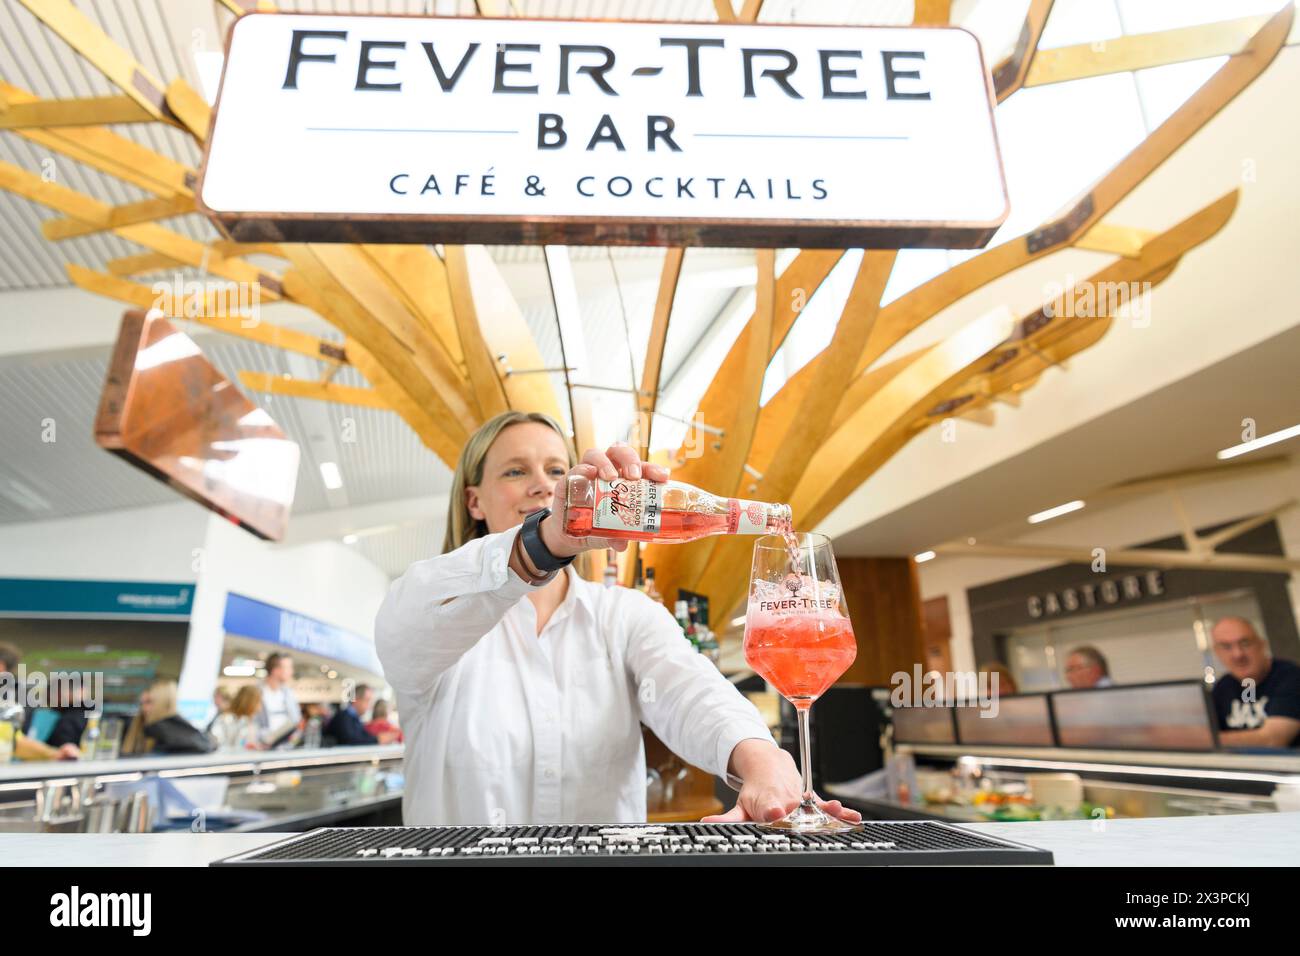 Edinburgh Airport, Fever Tree and stock images Stock Photo